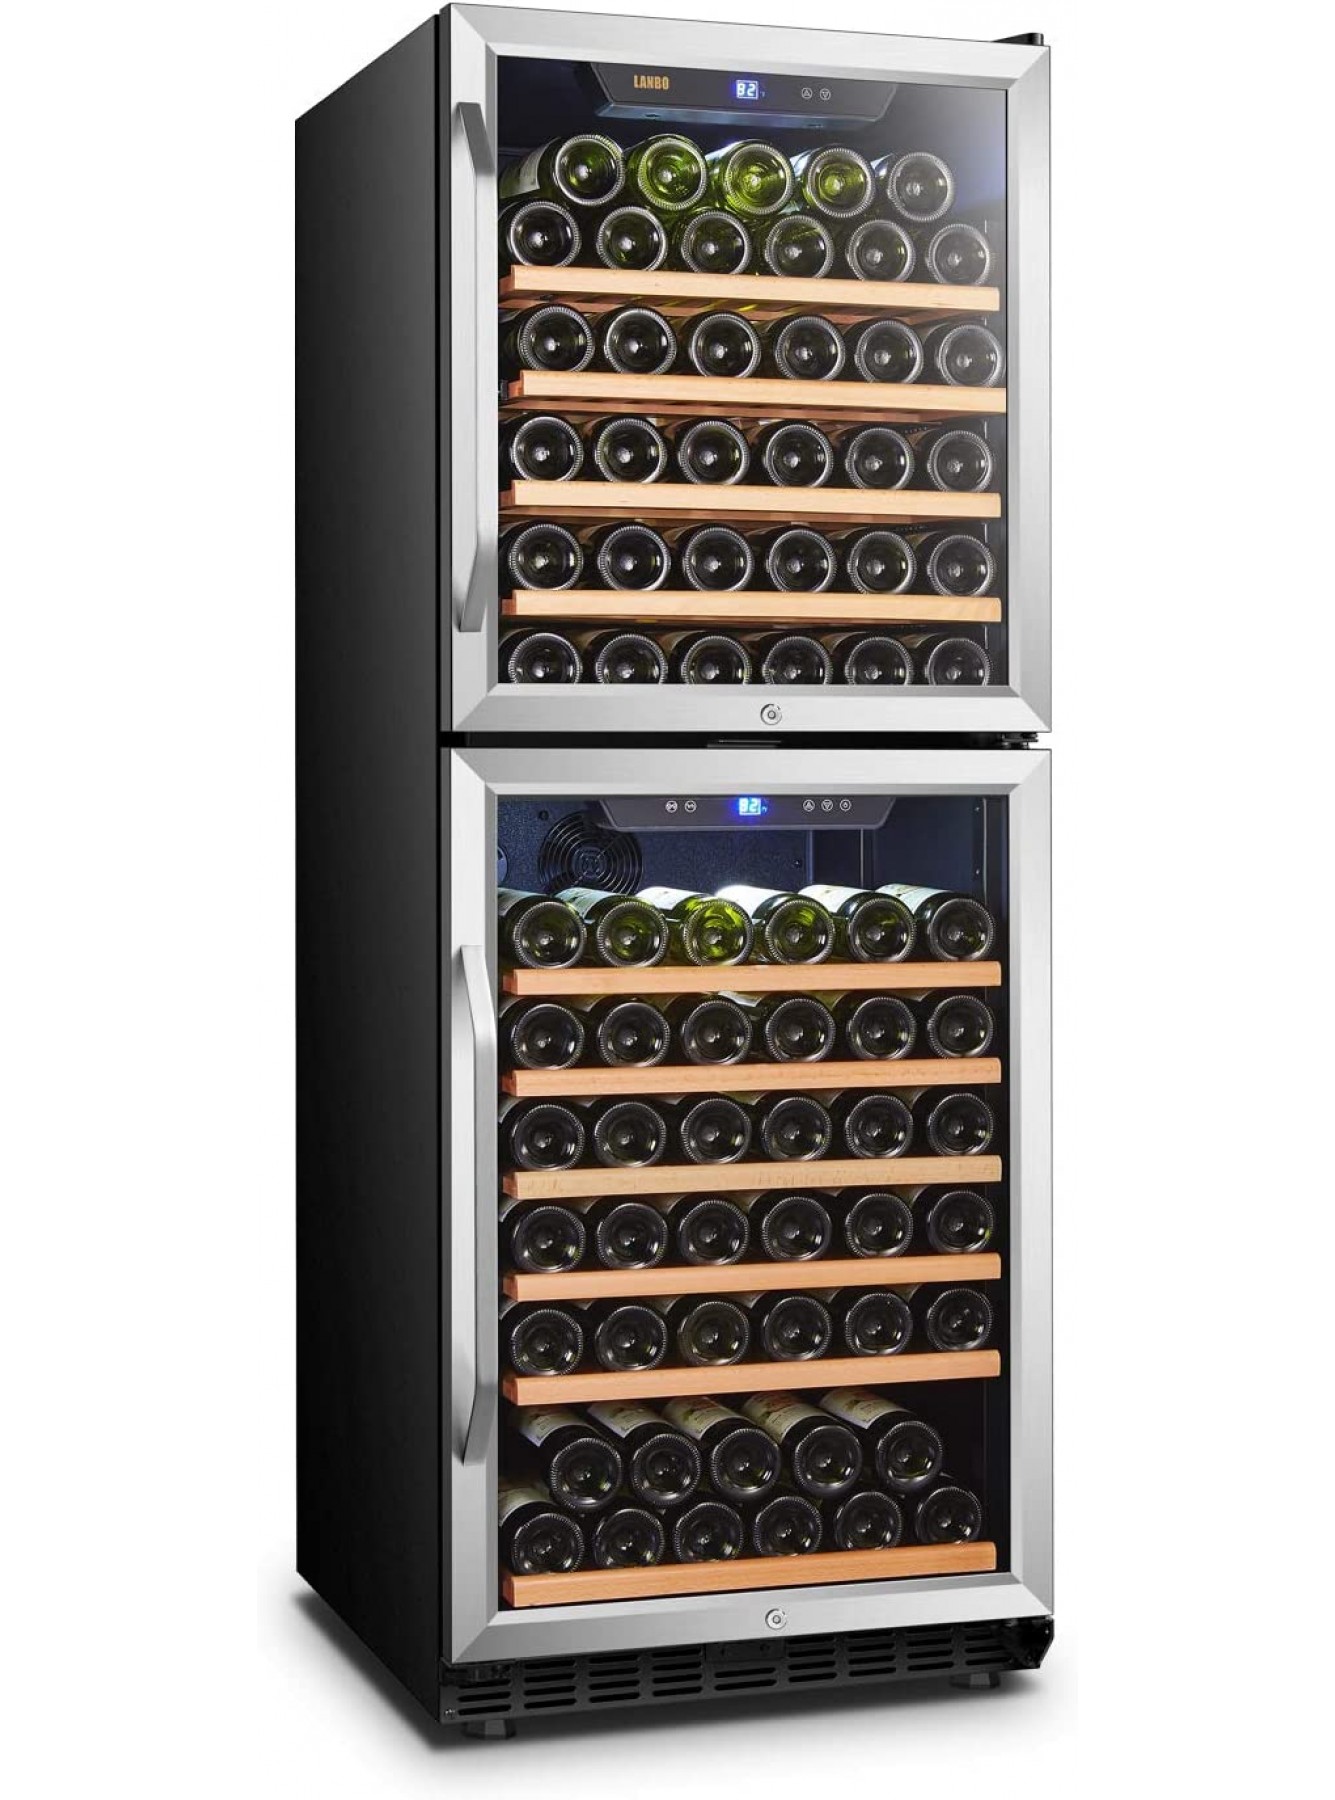 Lanbo Built-in Dual Zone Wine Cooler with Double-Layer Glass Door 133 Bottle B07KW3YVTM